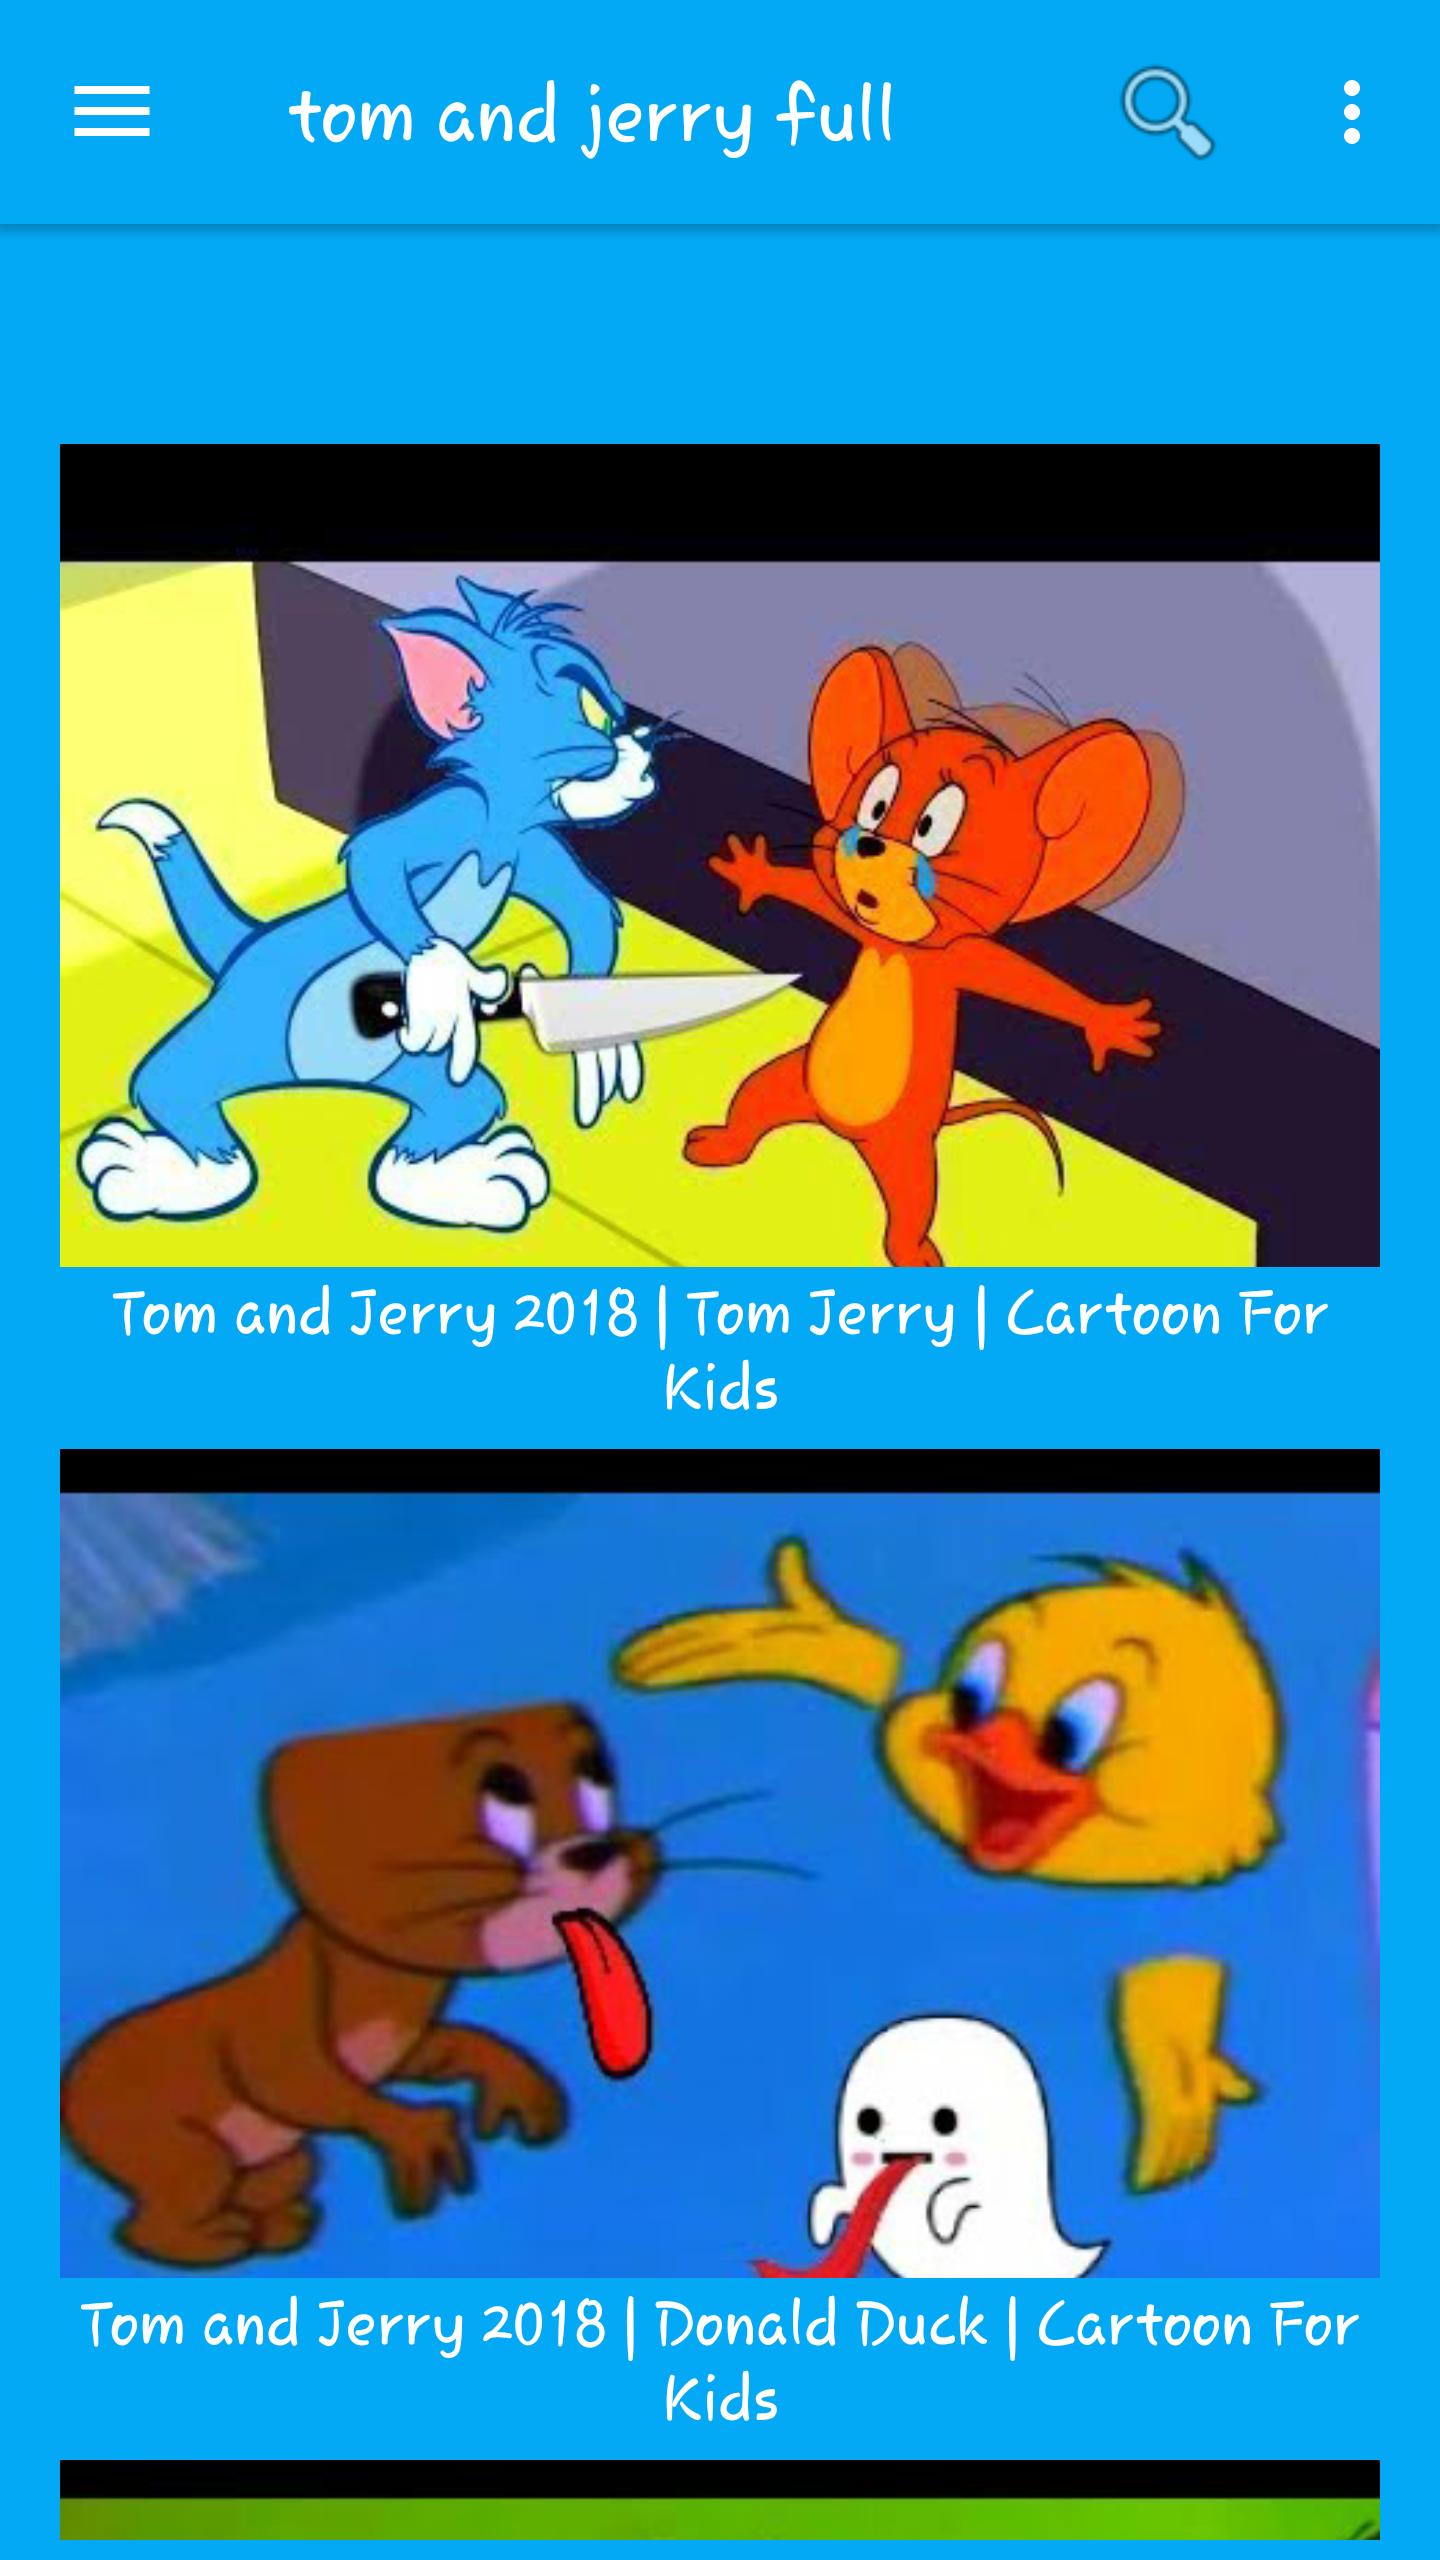 the Tom & Jerry Cartoons - full episodes 2019 for Android - APK Download